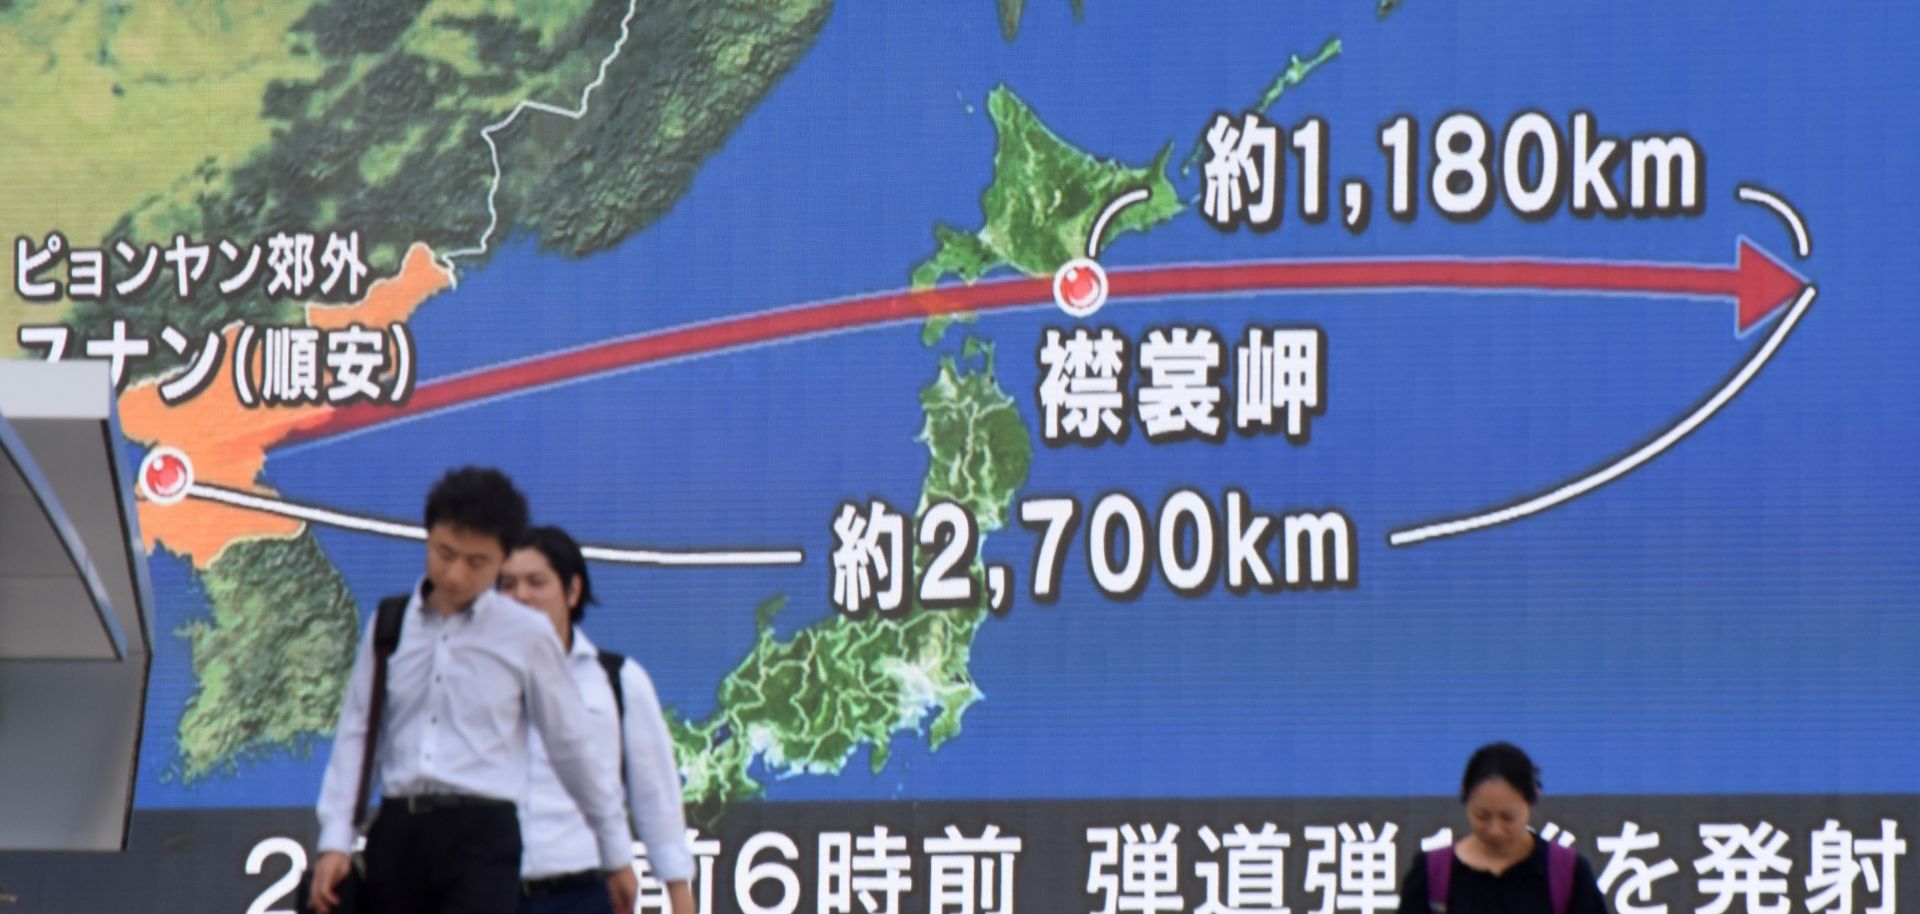 A huge map on the street in Tokyo shows the course and distance of a North Korean missile that flew over Japan in a test launch in 2017.